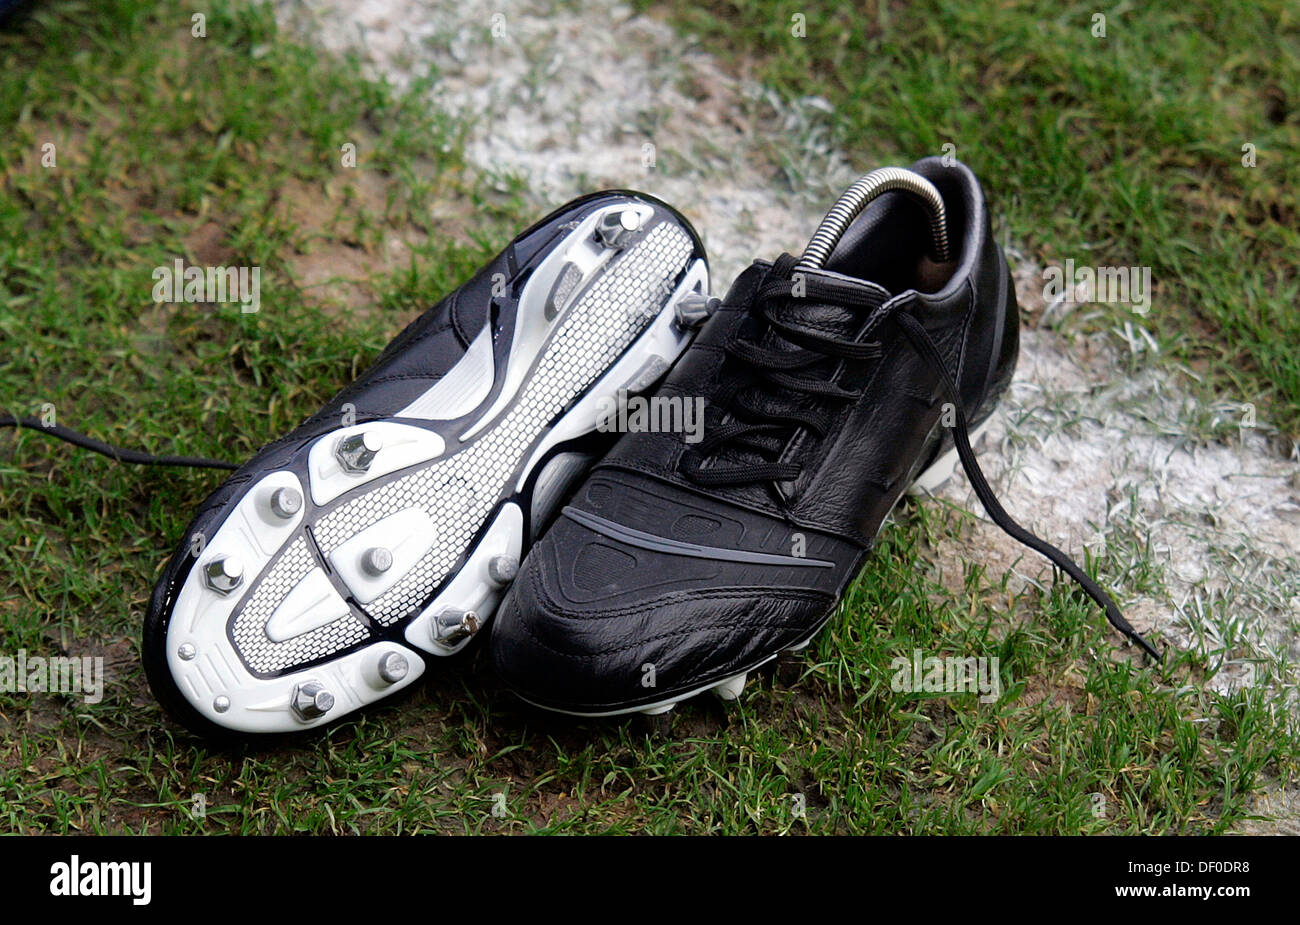 Soccer boots on the football pitch Stock Photo